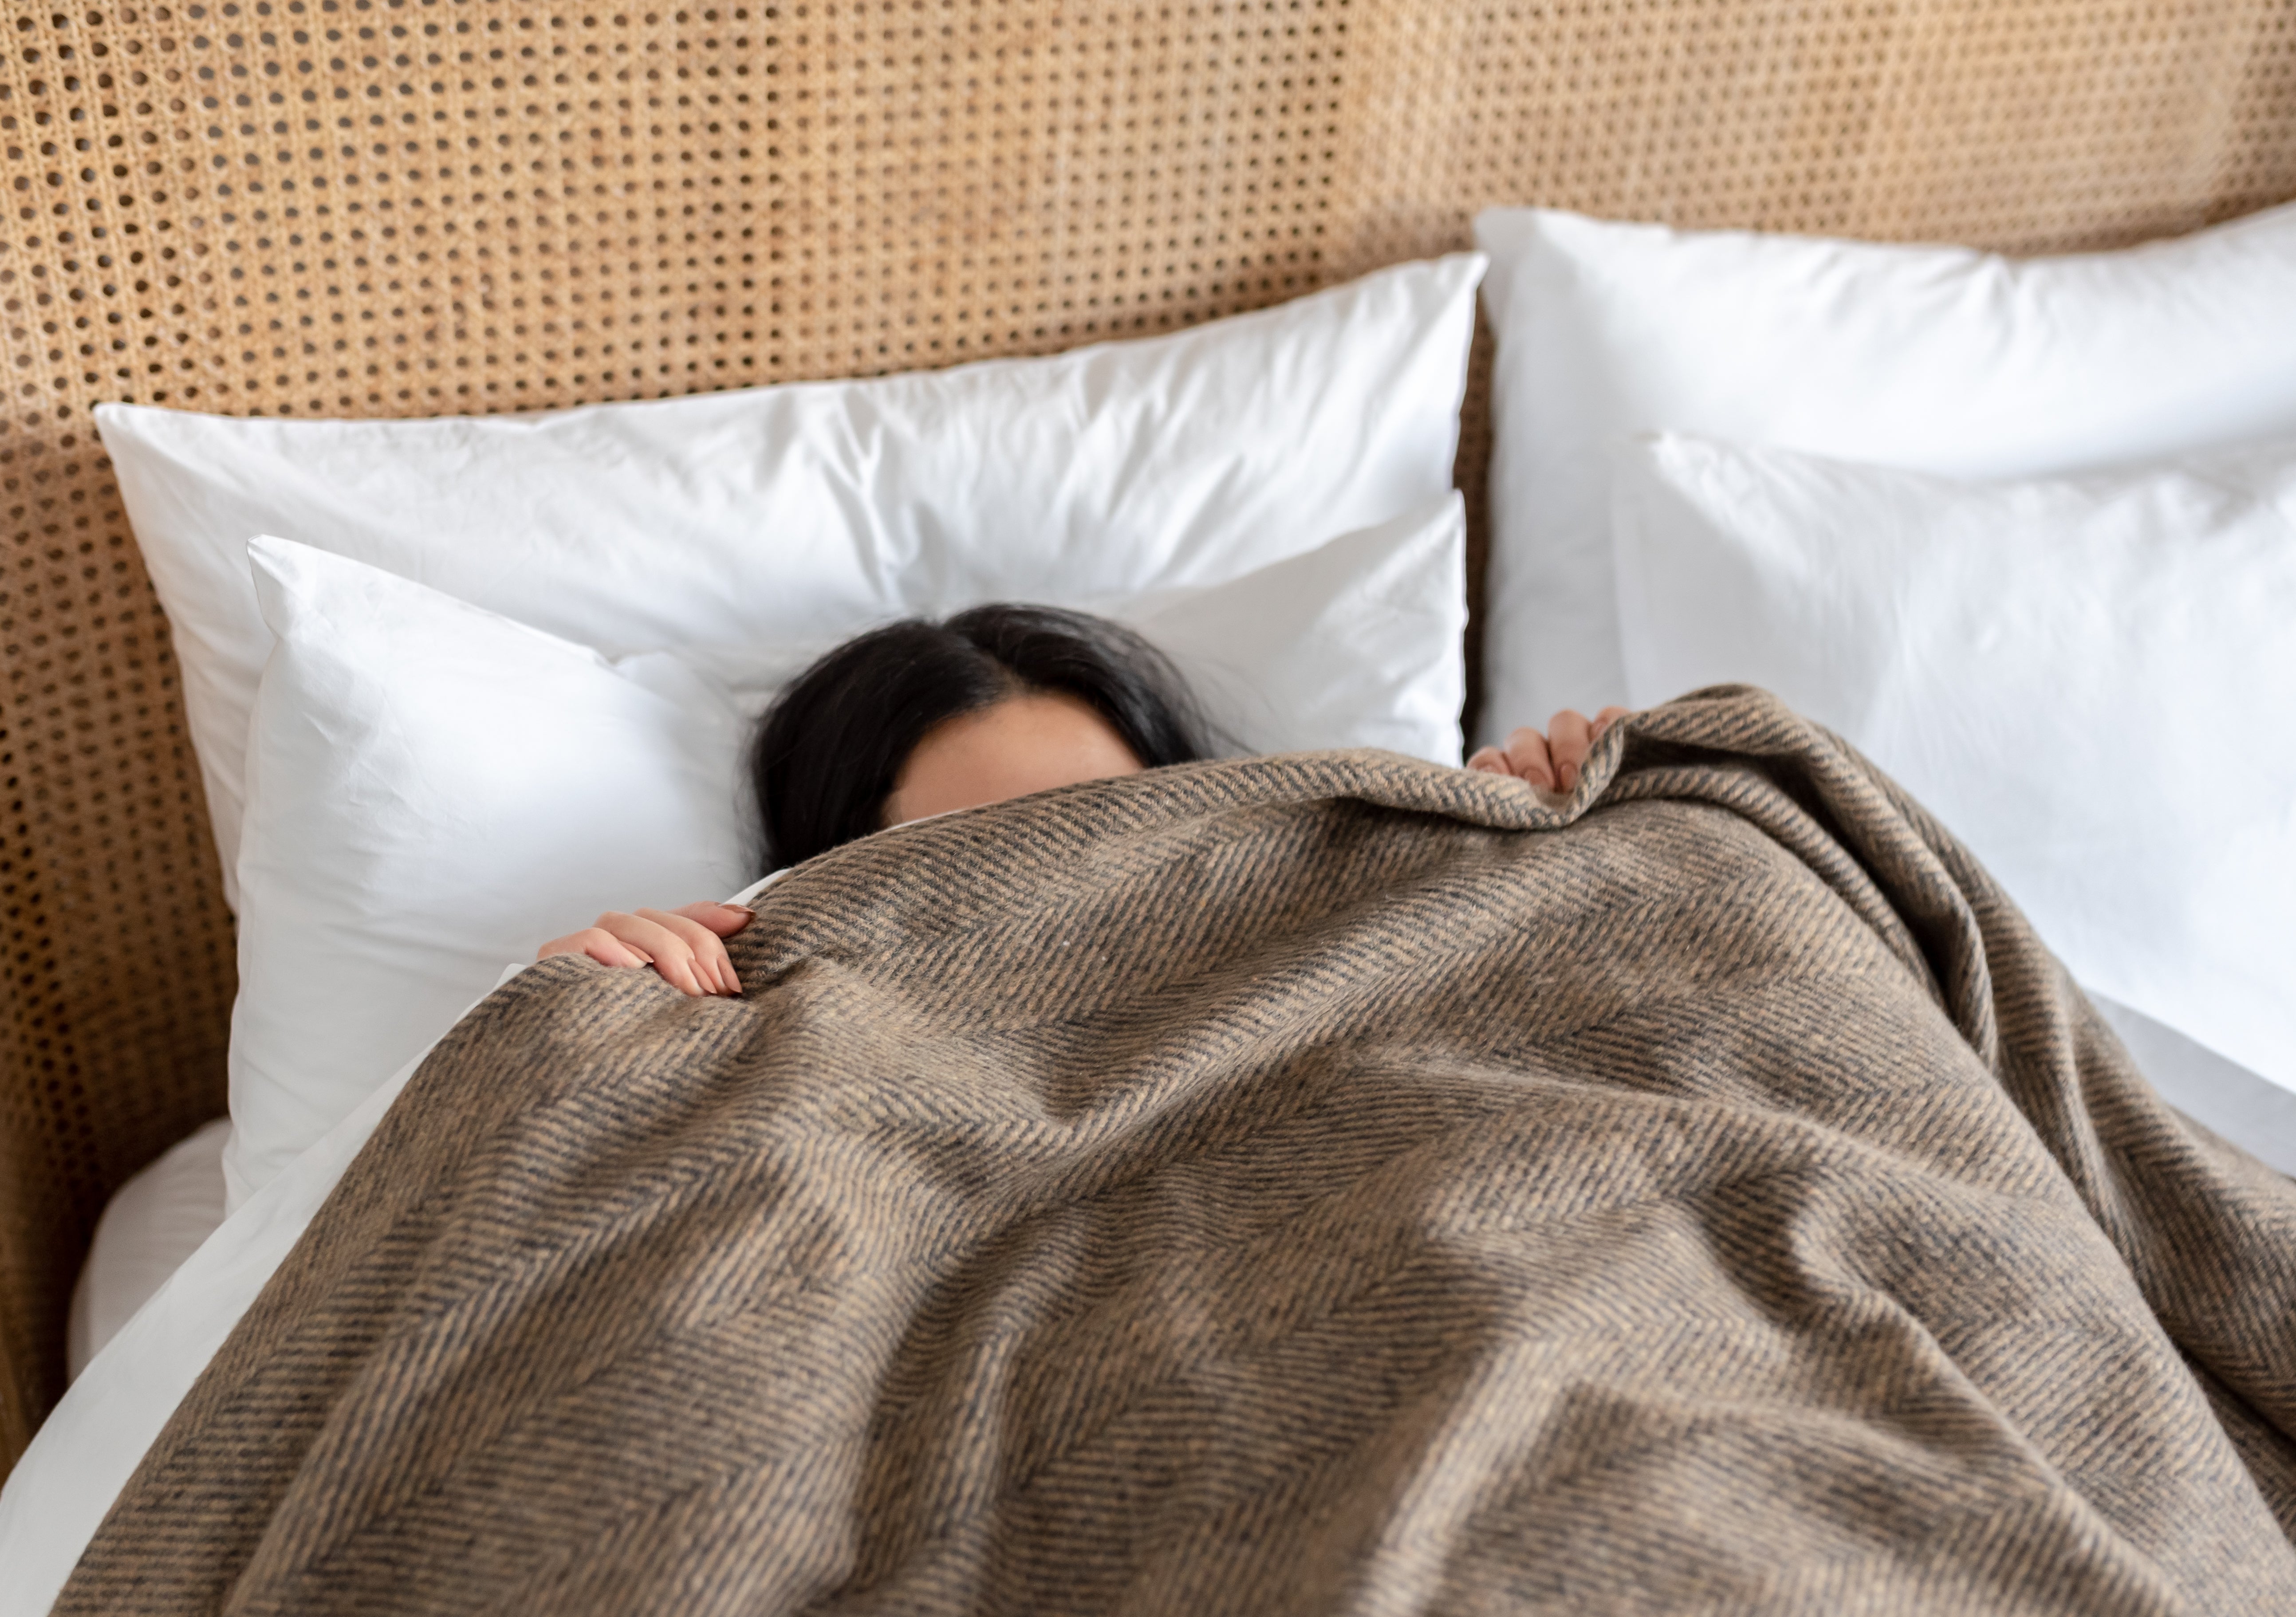 A girl lying in bed trying to sleep with a wool blanket pulled up across her face